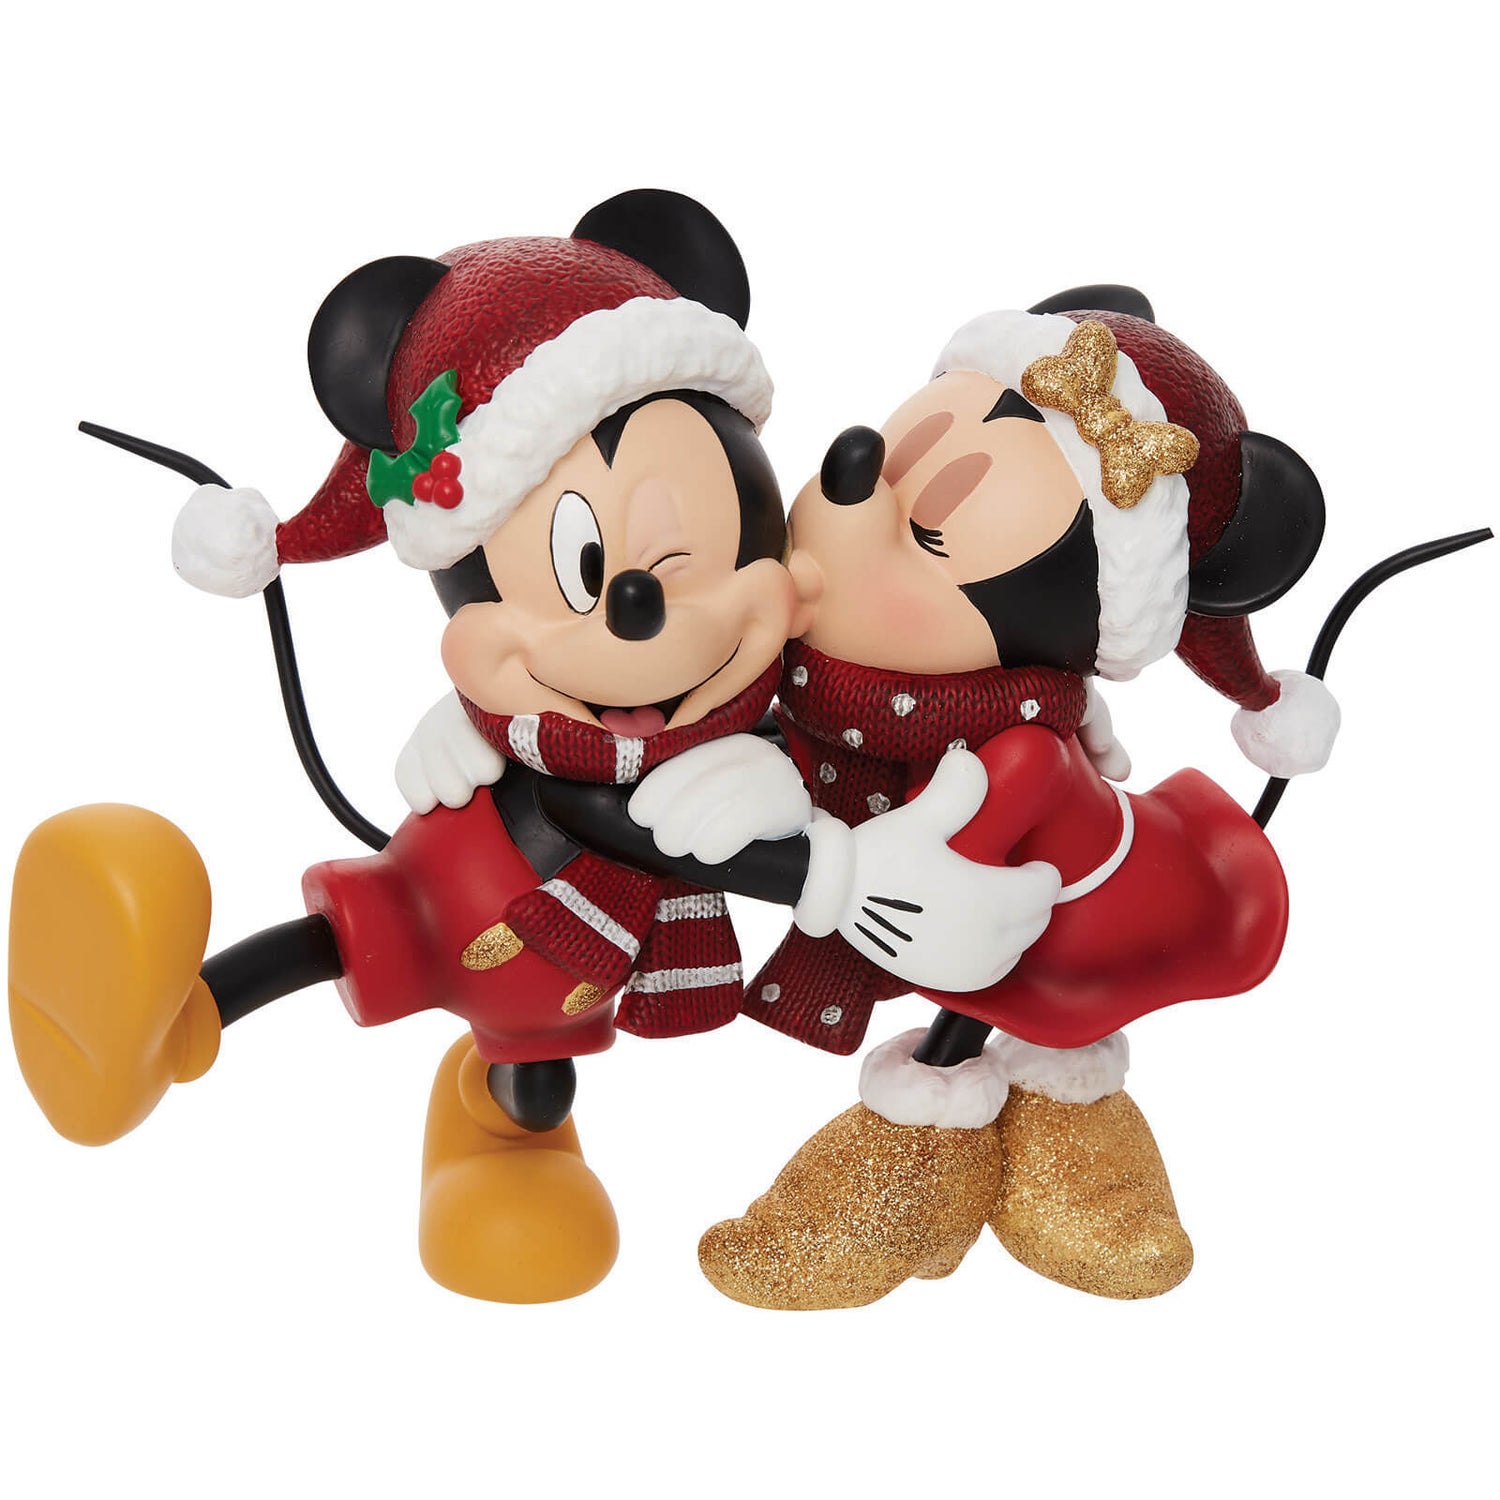 Disney Showcase Collection Mickey and Minnie Christmas Figurine